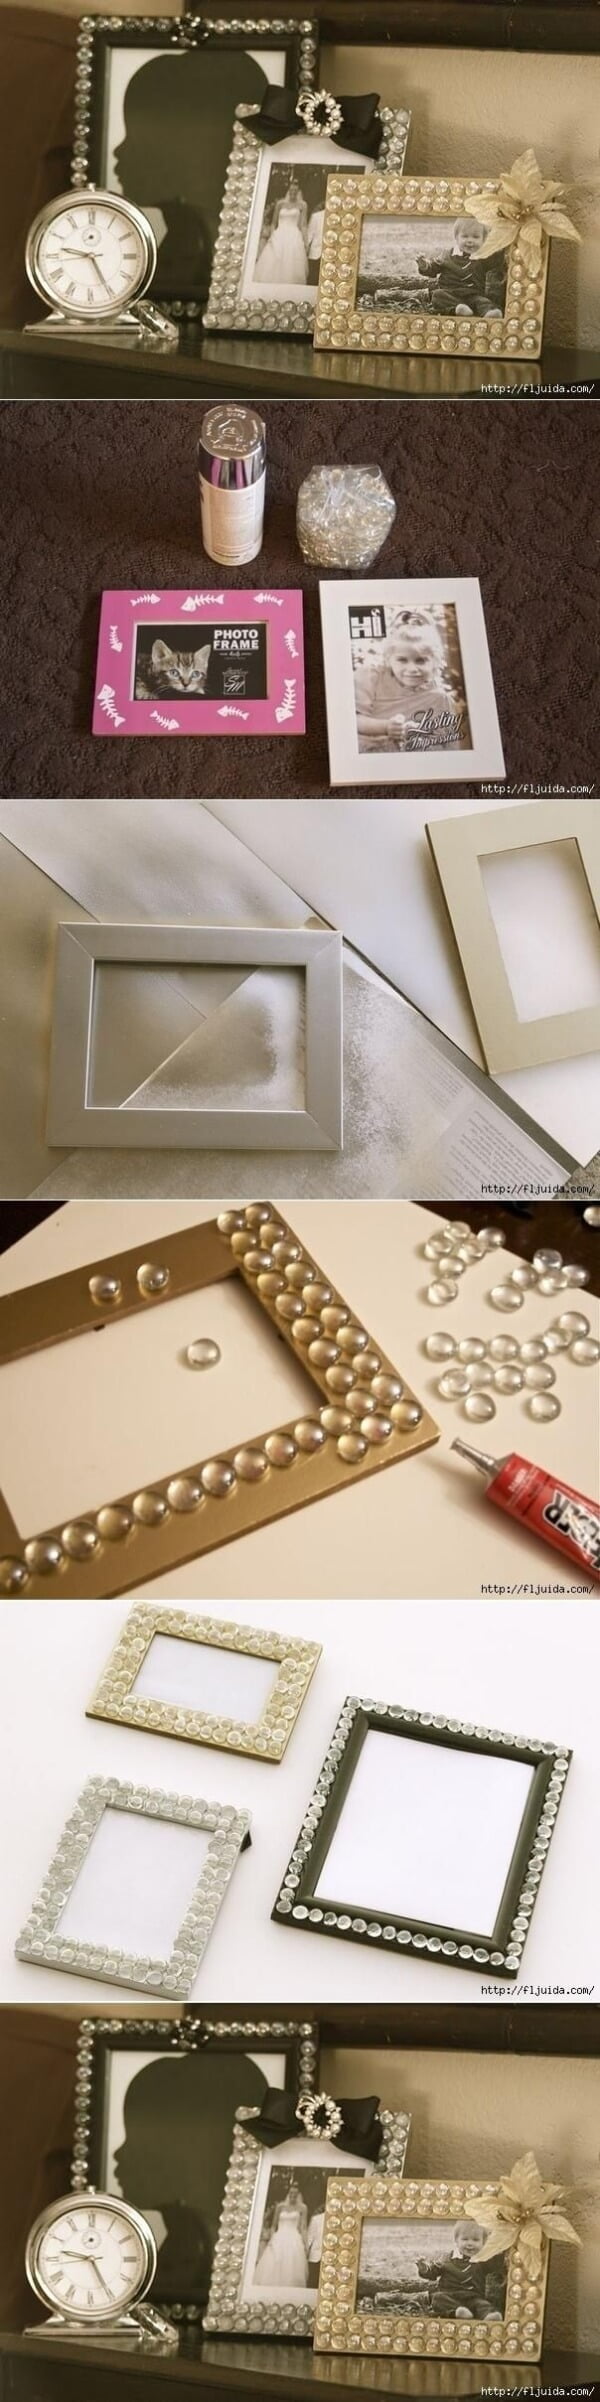 16 Creative and Fun DIY Photo and Picture Frame